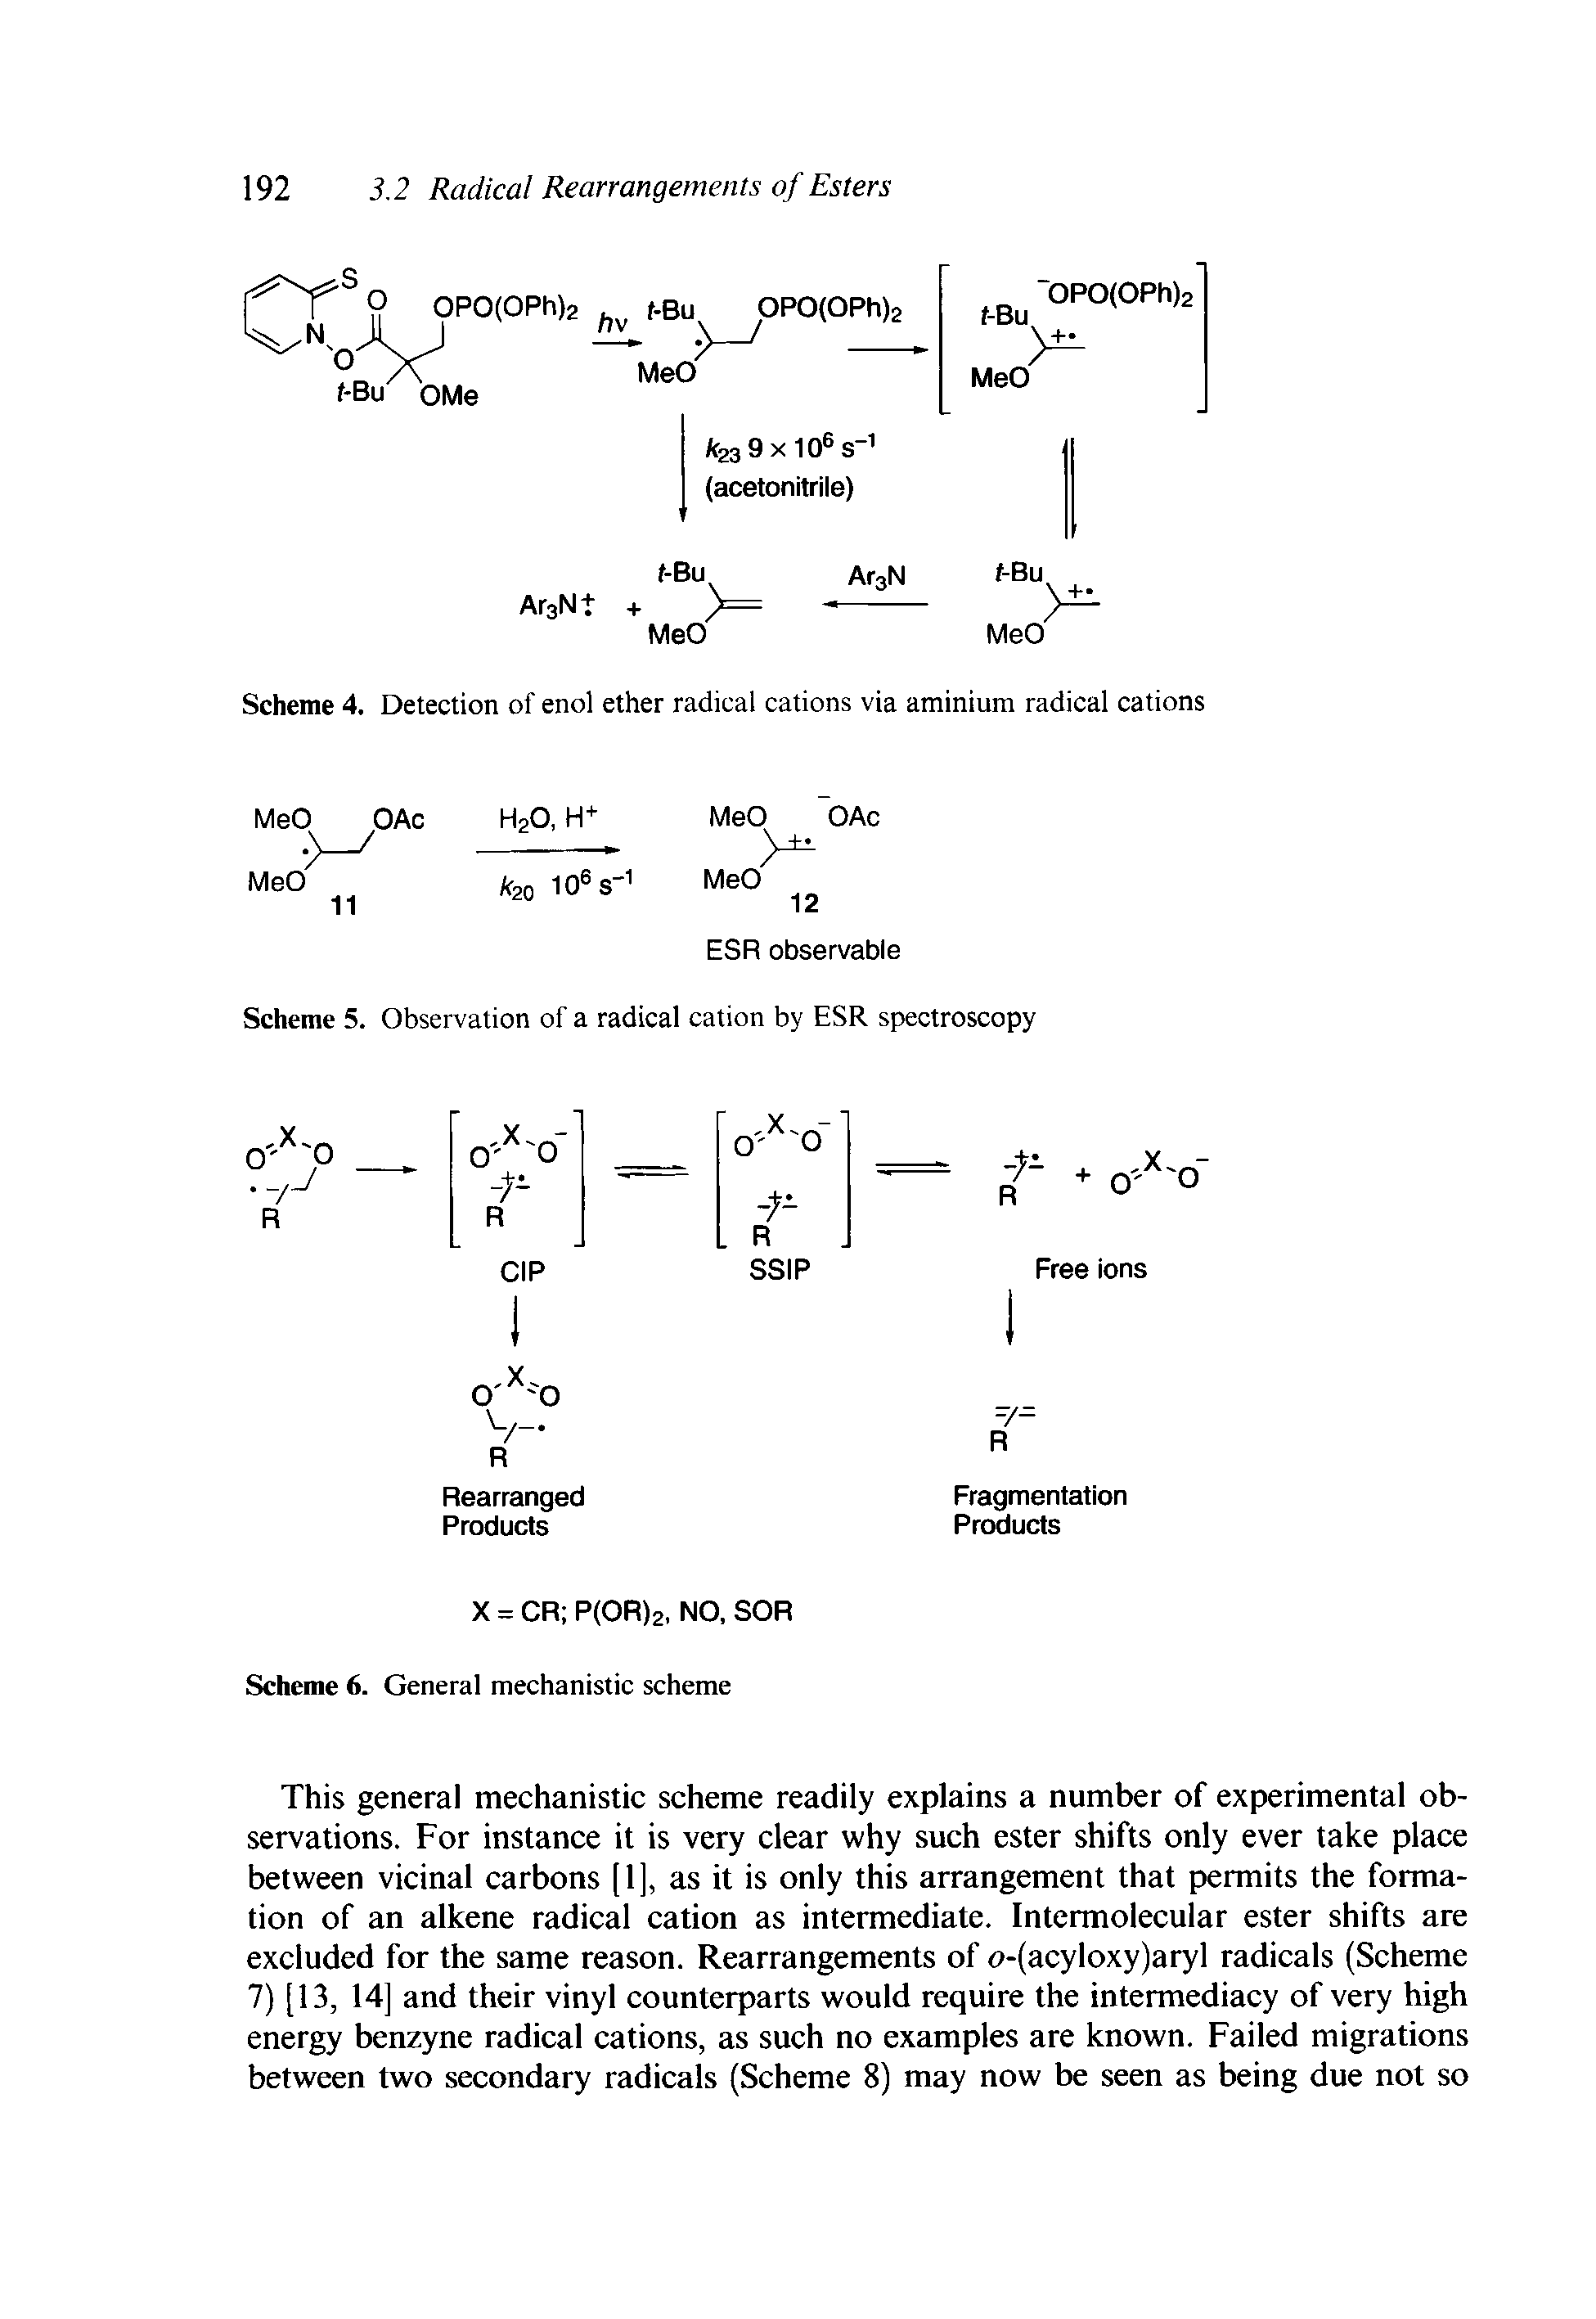 Scheme 4. Detection of enol ether radical cations via aminium radical cations...